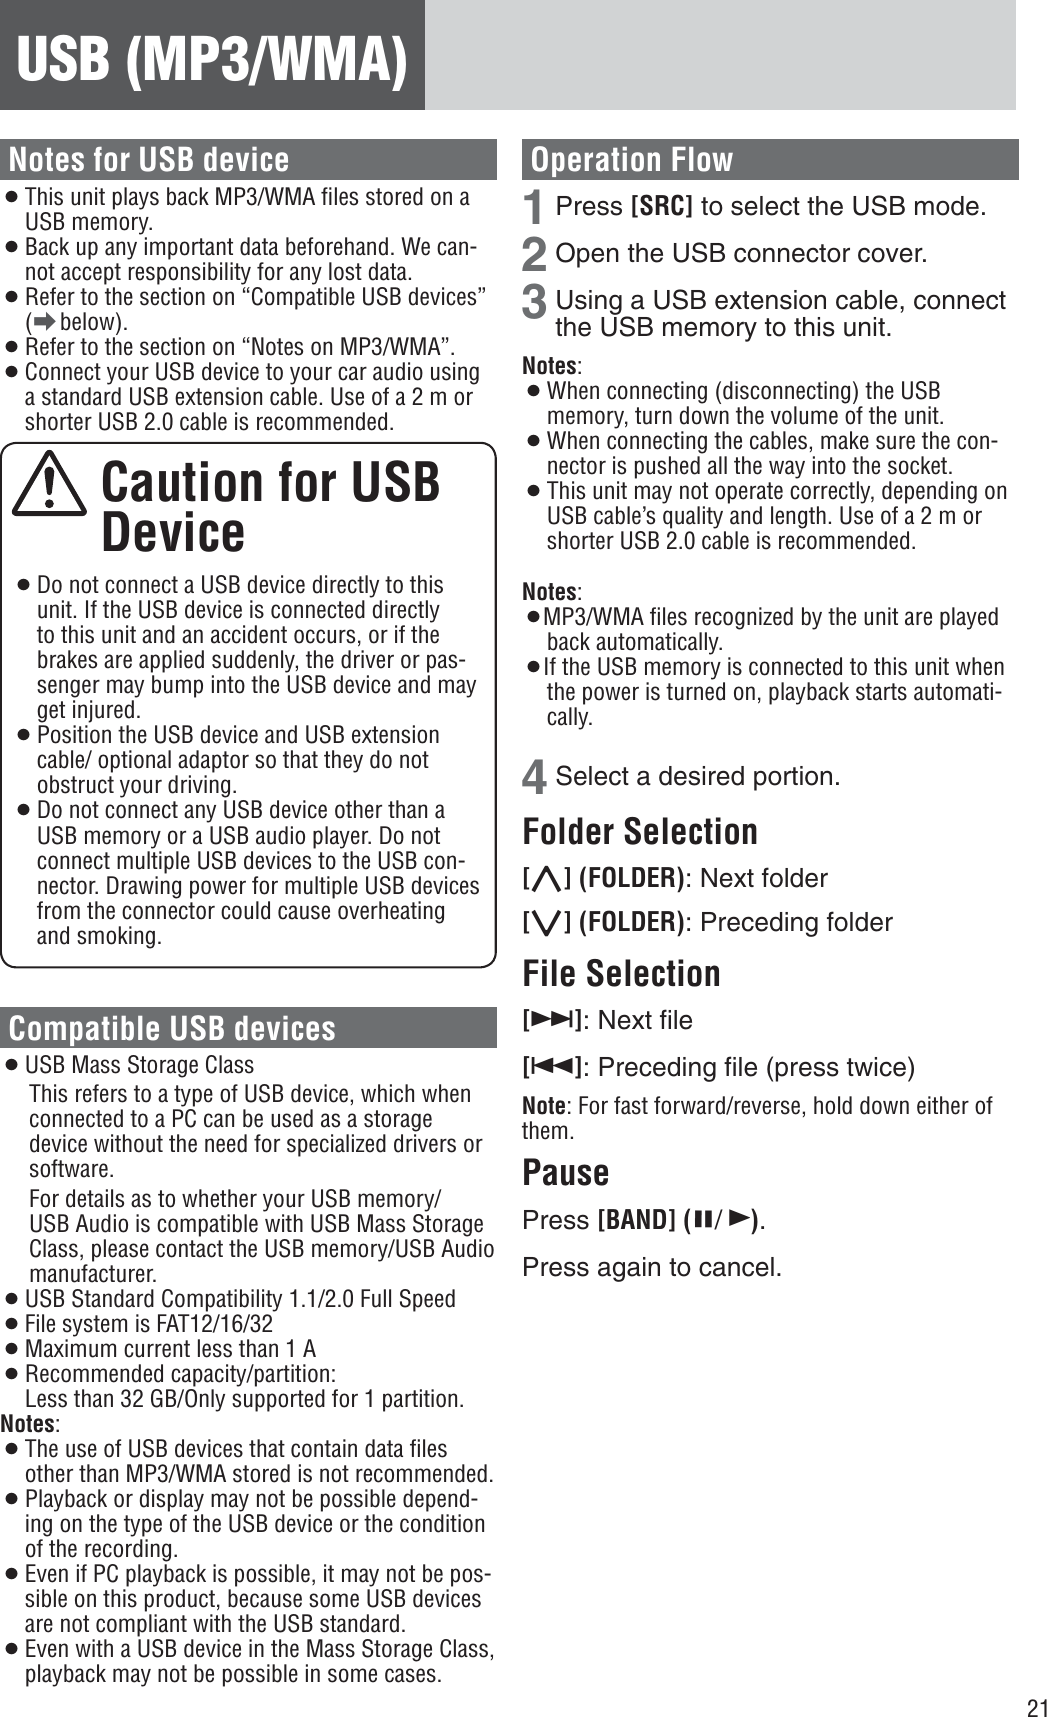 21USB (MP3/WMA)Notes for USB device¡This unit plays back MP3/WMA ﬁles stored on a USB memory. ¡Back up any important data beforehand. We can-not accept responsibility for any lost data. ¡Refer to the section on “Compatible USB devices” (a below). ¡Refer to the section on “Notes on MP3/WMA”. ¡Connect your USB device to your car audio using a standard USB extension cable. Use of a 2 m or shorter USB 2.0 cable is recommended.Caution for USB Device¡Do not connect a USB device directly to this unit. If the USB device is connected directly to this unit and an accident occurs, or if the brakes are applied suddenly, the driver or pas-senger may bump into the USB device and may get injured. ¡Position the USB device and USB extension cable/ optional adaptor so that they do not obstruct your driving. ¡Do not connect any USB device other than a USB memory or a USB audio player. Do not connect multiple USB devices to the USB con-nector. Drawing power for multiple USB devices from the connector could cause overheating and smoking. Compatible USB devices ¡USB Mass Storage Class This refers to a type of USB device, which when connected to a PC can be used as a storage device without the need for specialized drivers or software.For details as to whether your USB memory/USB Audio is compatible with USB Mass Storage Class, please contact the USB memory/USB Audio manufacturer. ¡USB Standard Compatibility 1.1/2.0 Full Speed ¡File system is FAT12/16/32 ¡Maximum current less than 1 A ¡Recommended capacity/partition:Less than 32 GB/Only supported for 1 partition.Notes:¡The use of USB devices that contain data ﬁles other than MP3/WMA stored is not recommended. ¡Playback or display may not be possible depend-ing on the type of the USB device or the condition of the recording. ¡Even if PC playback is possible, it may not be pos-sible on this product, because some USB devices are not compliant with the USB standard. ¡Even with a USB device in the Mass Storage Class, playback may not be possible in some cases. Operation Flow1Press [SRC] to select the USB mode. 2Open the USB connector cover. 3Using a USB extension cable, connect the USB memory to this unit. Notes:¡When connecting (disconnecting) the USB memory, turn down the volume of the unit. ¡When connecting the cables, make sure the con-nector is pushed all the way into the socket. ¡This unit may not operate correctly, depending on USB cable’s quality and length. Use of a 2 m or shorter USB 2.0 cable is recommended. Notes:¡MP3/WMA ﬁles recognized by the unit are played back automatically. ¡If the USB memory is connected to this unit when the power is turned on, playback starts automati-cally.4Select a desired portion. Folder Selection [}] (FOLDER): Next folder [{] (FOLDER): Preceding folder File Selection [7]: Next ﬁle [6]: Preceding ﬁle (press twice) Note: For fast forward/reverse, hold down either of them.PausePress [BAND] (h/5).Press again to cancel. 